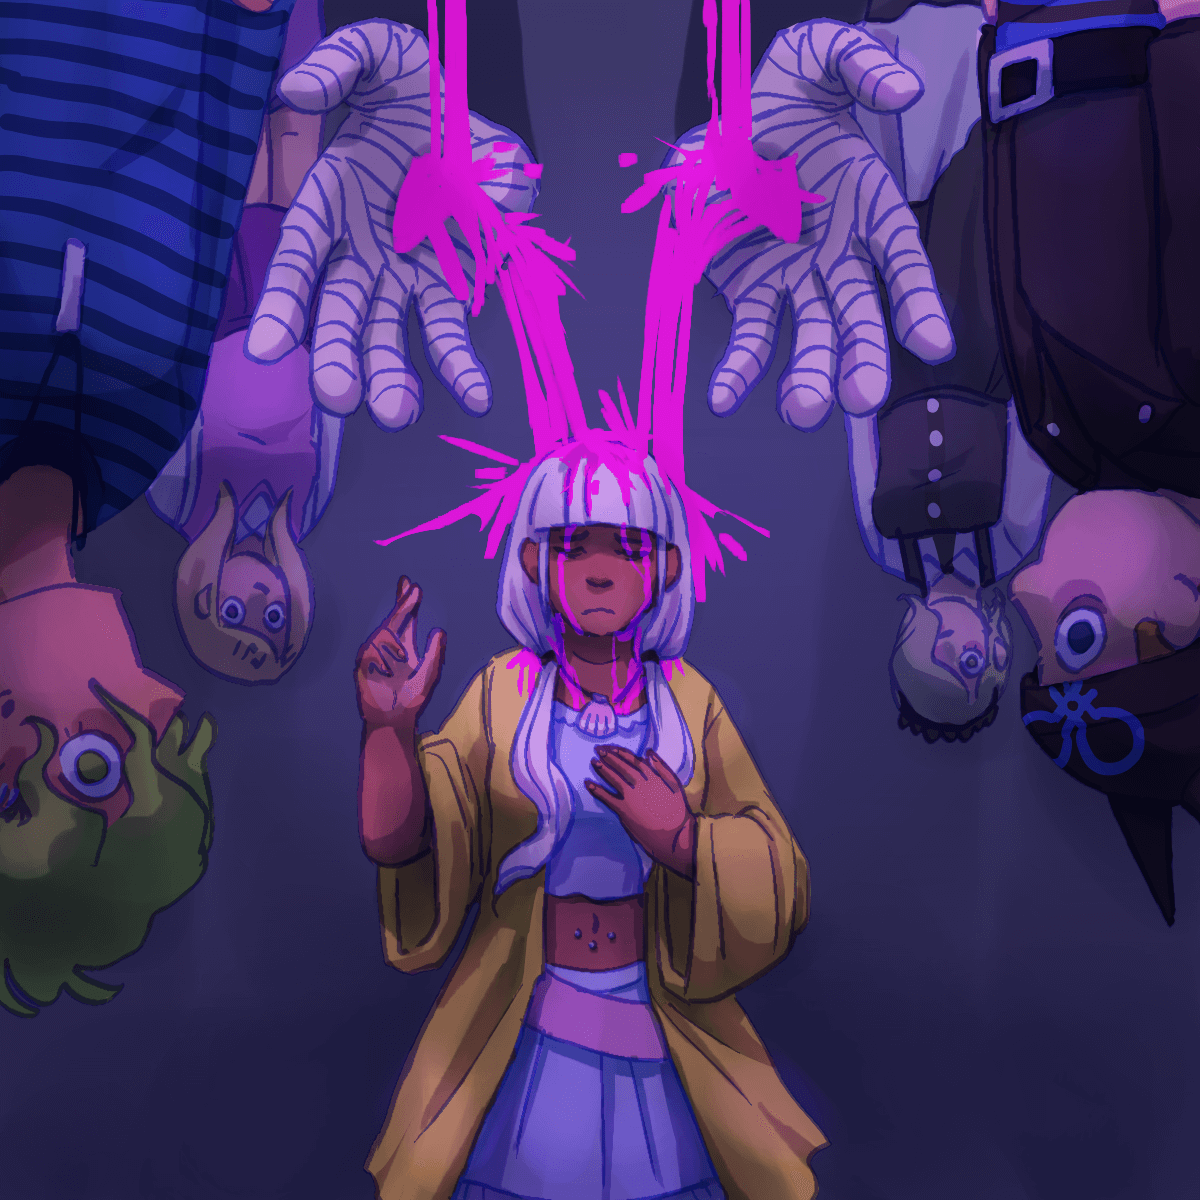 a drawing of angie standing in the jesus pose with a resigned expression. the
		effigies of rantaro, kaede, kirumi, and ryoma hang upside down around her. two large bandaged hands float above her,
		pouring blood onto her head.